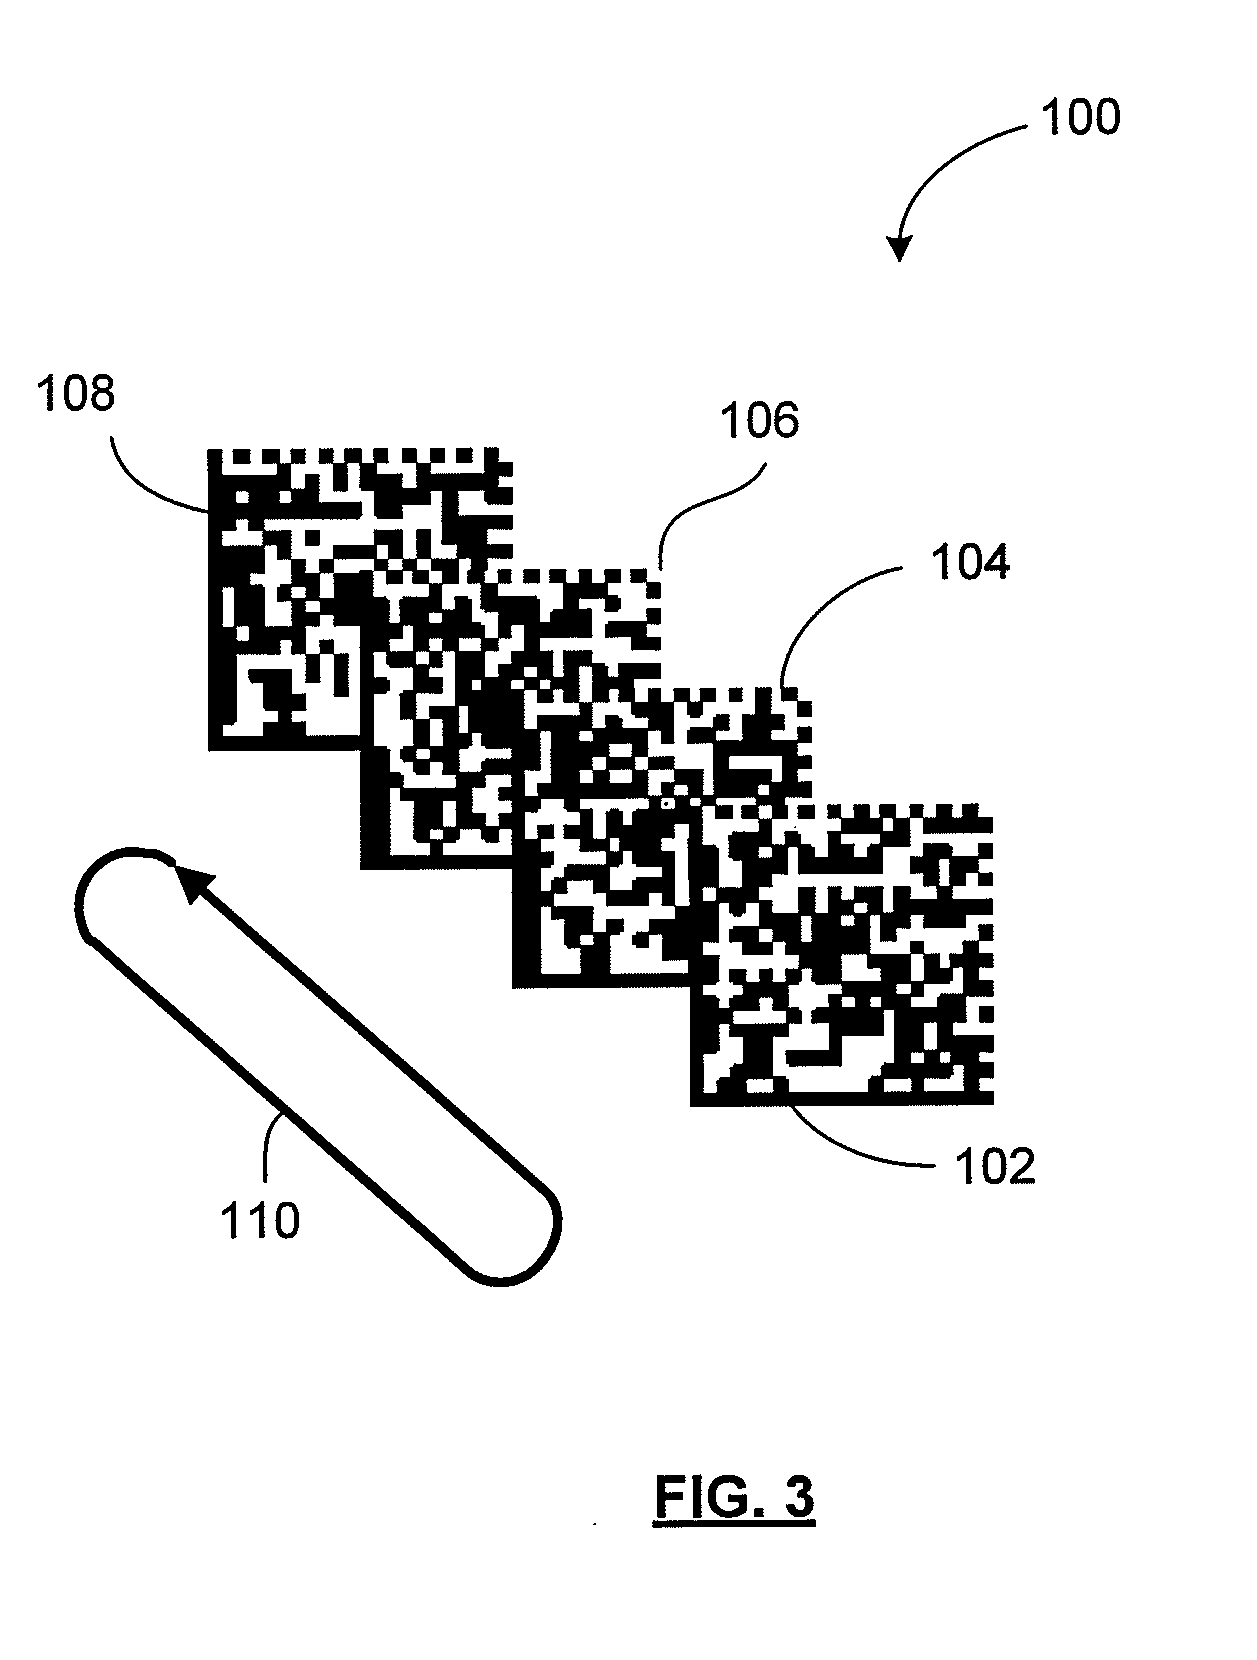 Systems and Methods for Animating Barcodes